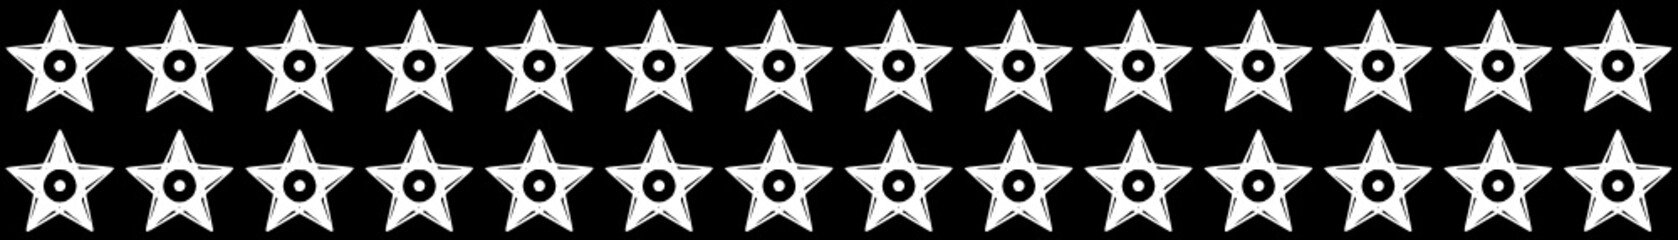 Black and white pattern with a five-pointed stars